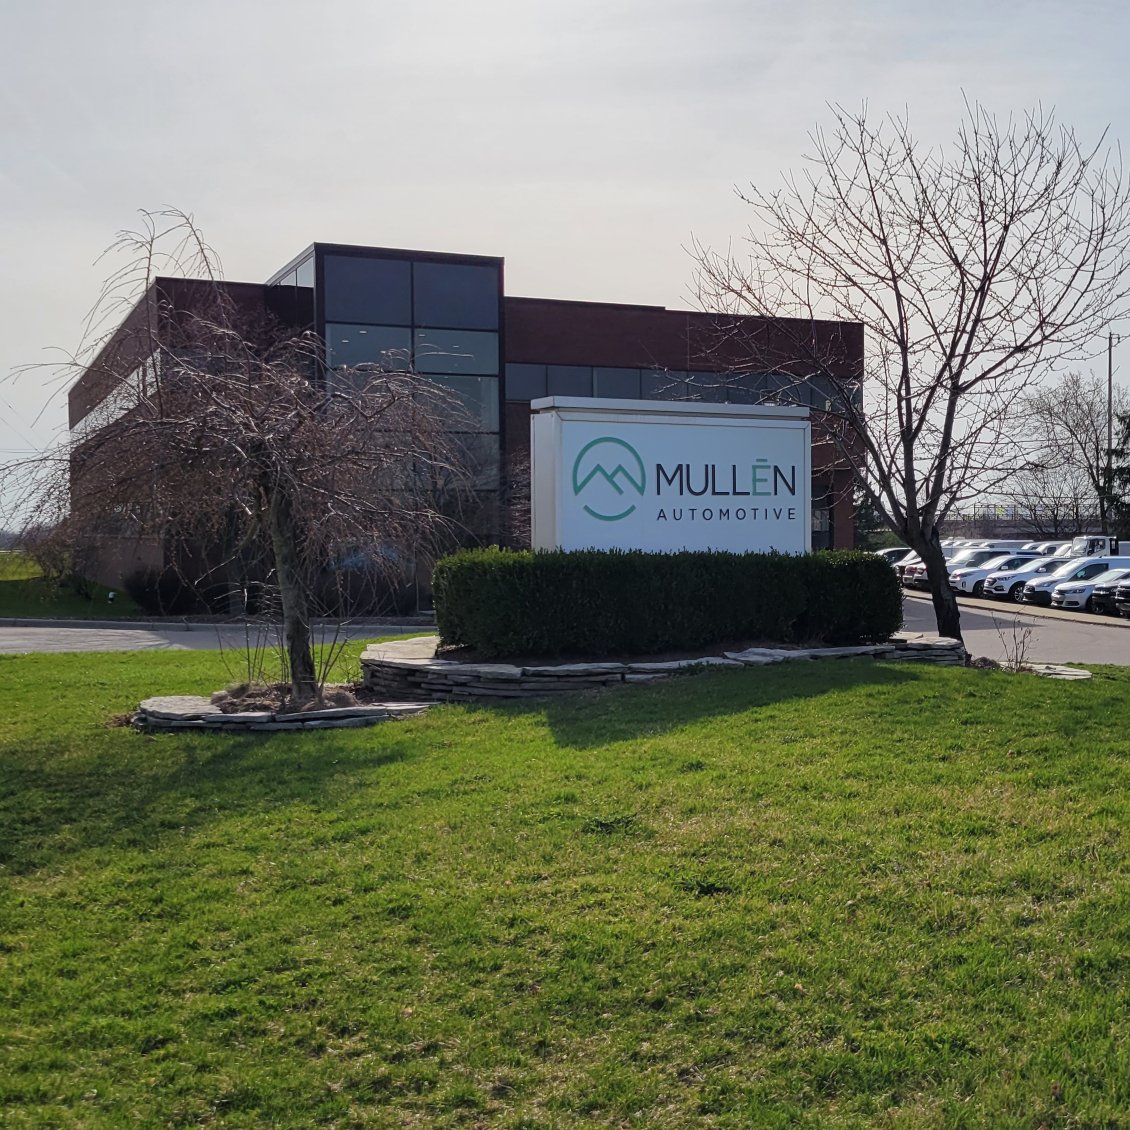 Lawrence Hardge is at the Mullen Tech Center in Troy, MI., working with the #MullenCommercial Vehicle Team on Energy Management Module (EMM) integration.

$MULN #MullenUSA #MullenAutomotive #GreenTechnology #EVTechnology #EVBattery #EV #CleanEnergy #Sustainability